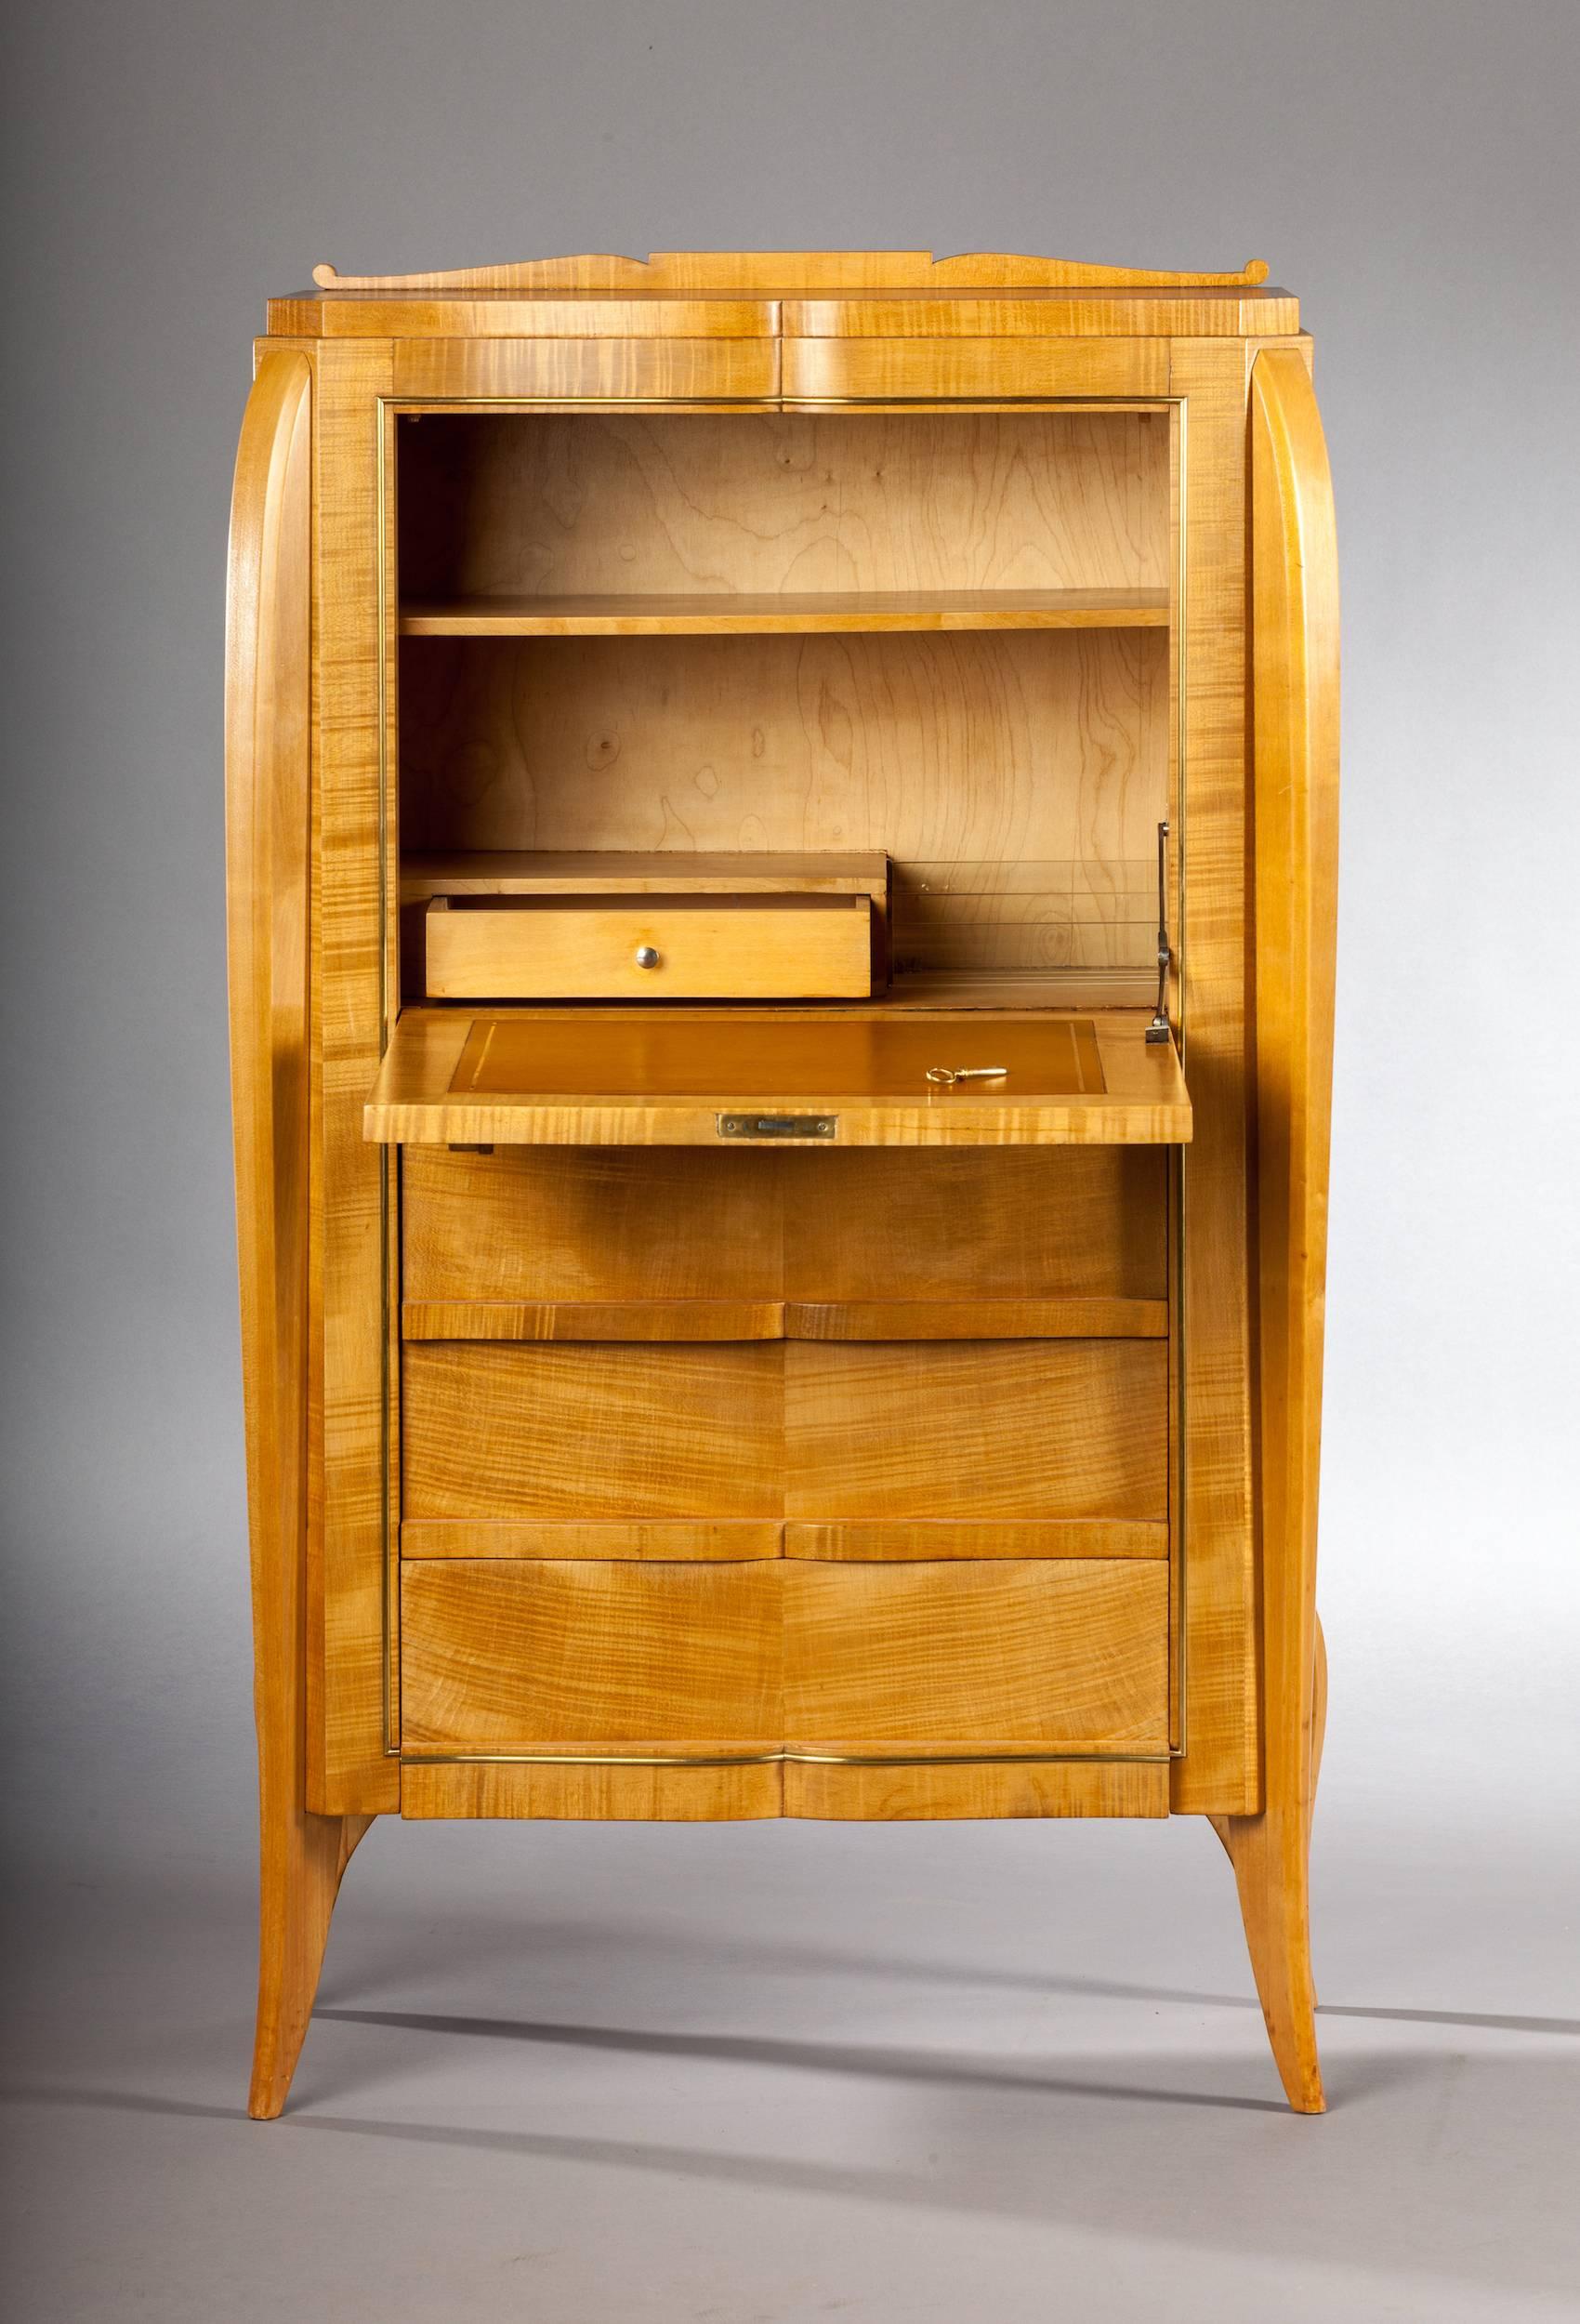 Beautiful French sycamore veneer secretary framed with gilded brass details, the fall front decorated with the original cafe au lait coloured leather, inside is the drawer and elegant glass paper holder. Attributed to René Prou (1889-1947).